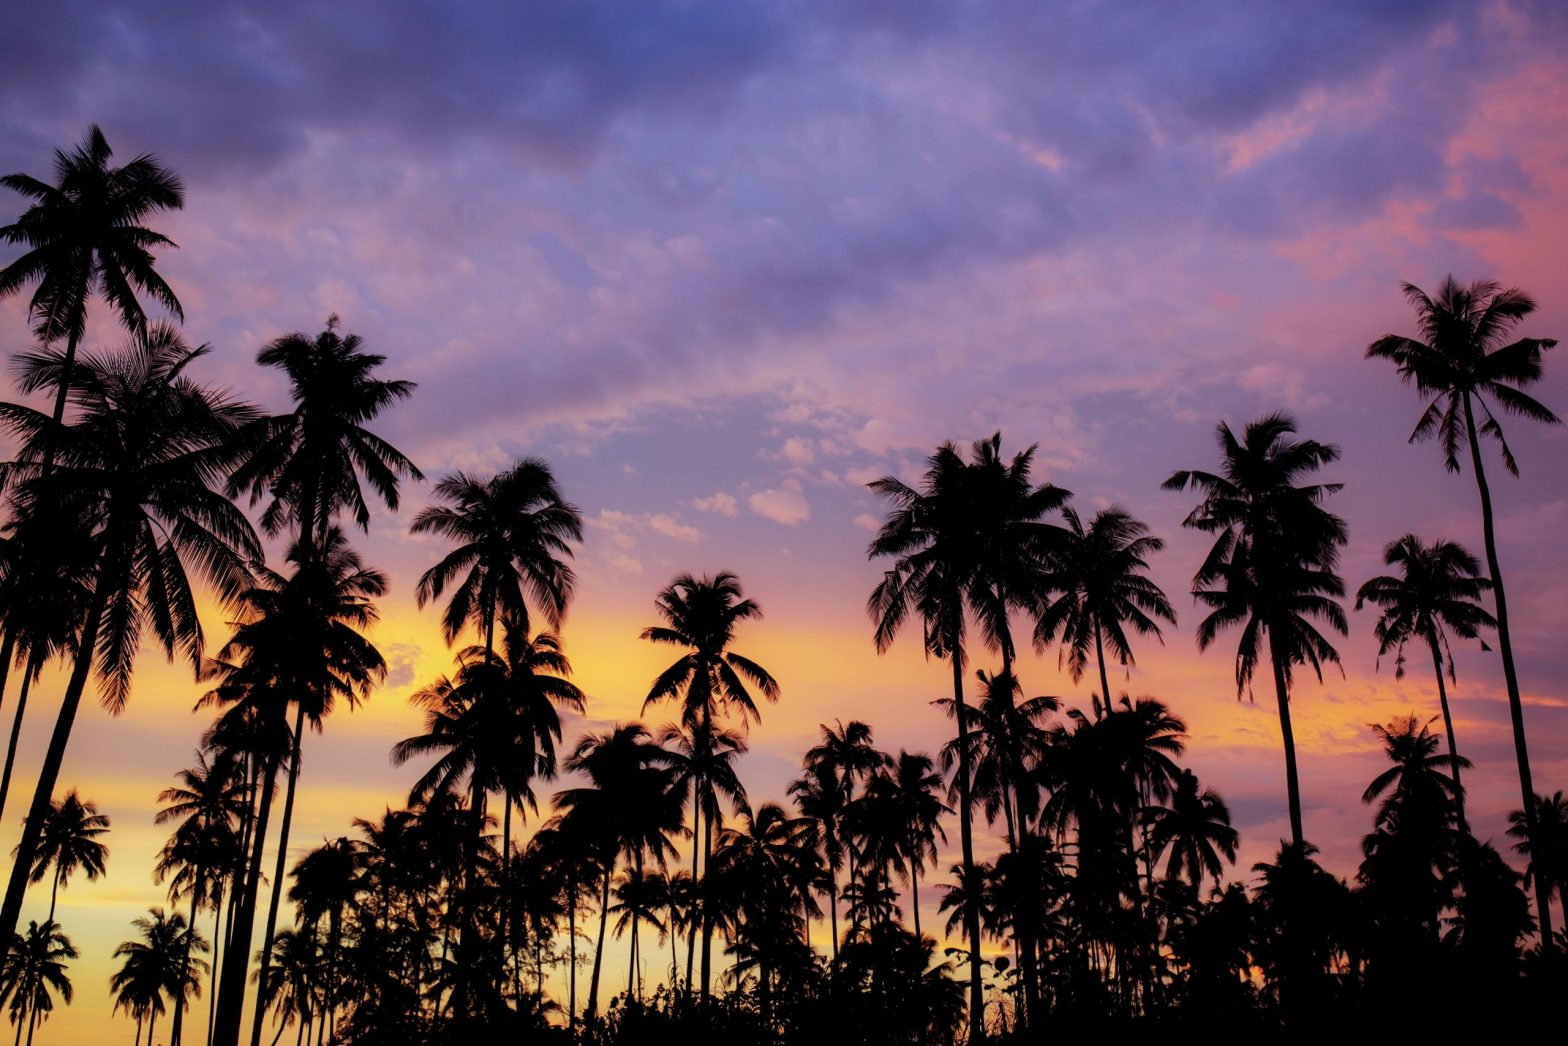 Palm trees overlooking a beautiful sky, emphasizing the beauty of California rehab centers